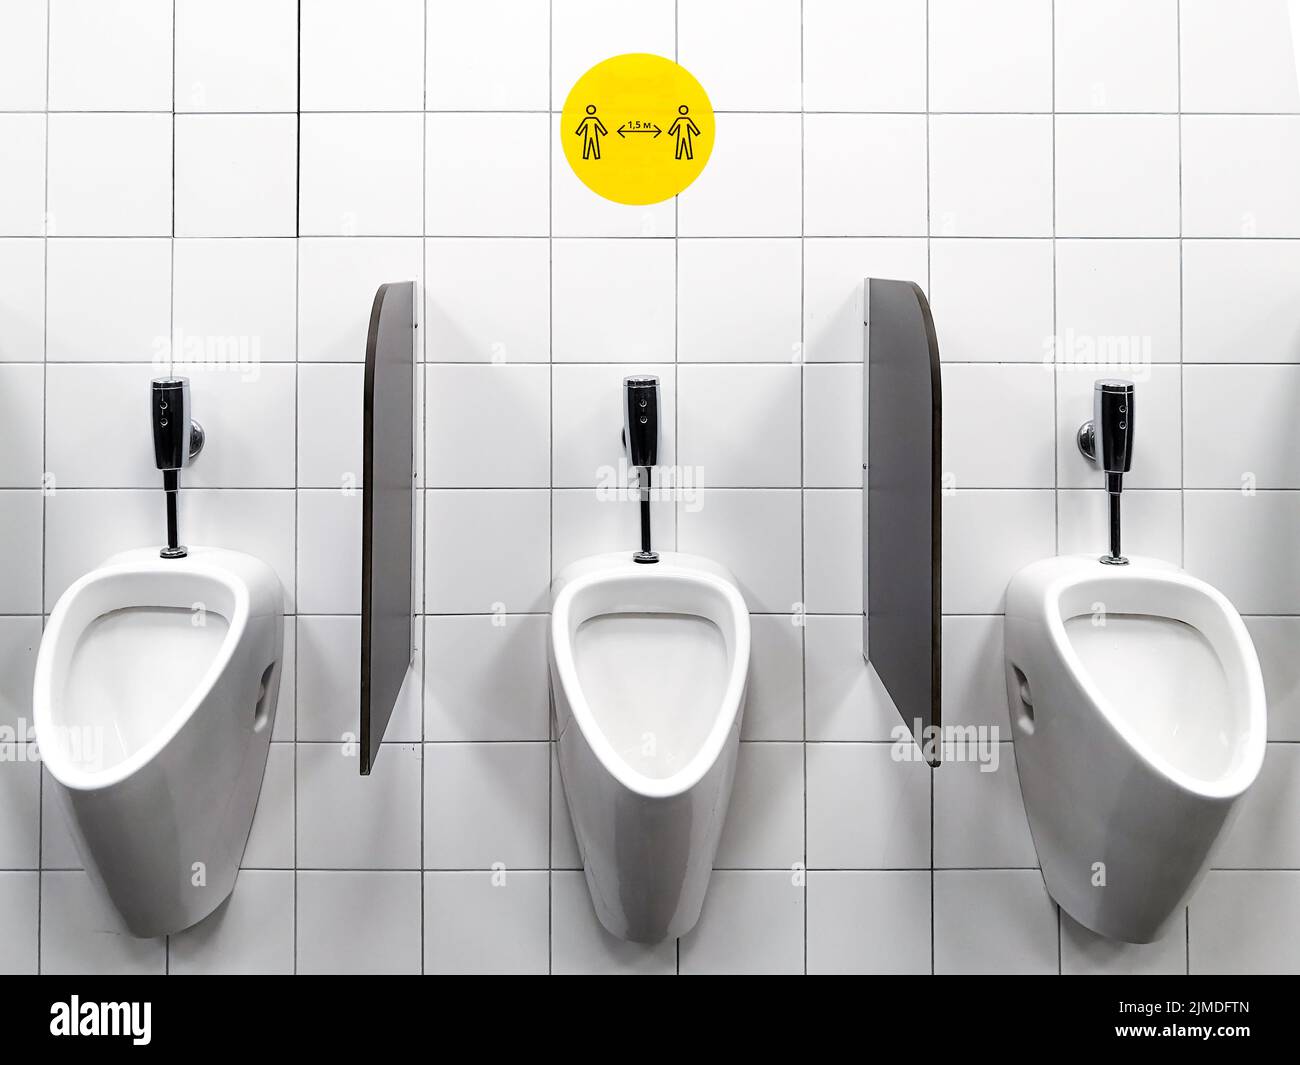 Urinals on the white wall of a public men's toilet. The yellow sticker encourages social distancing Stock Photo